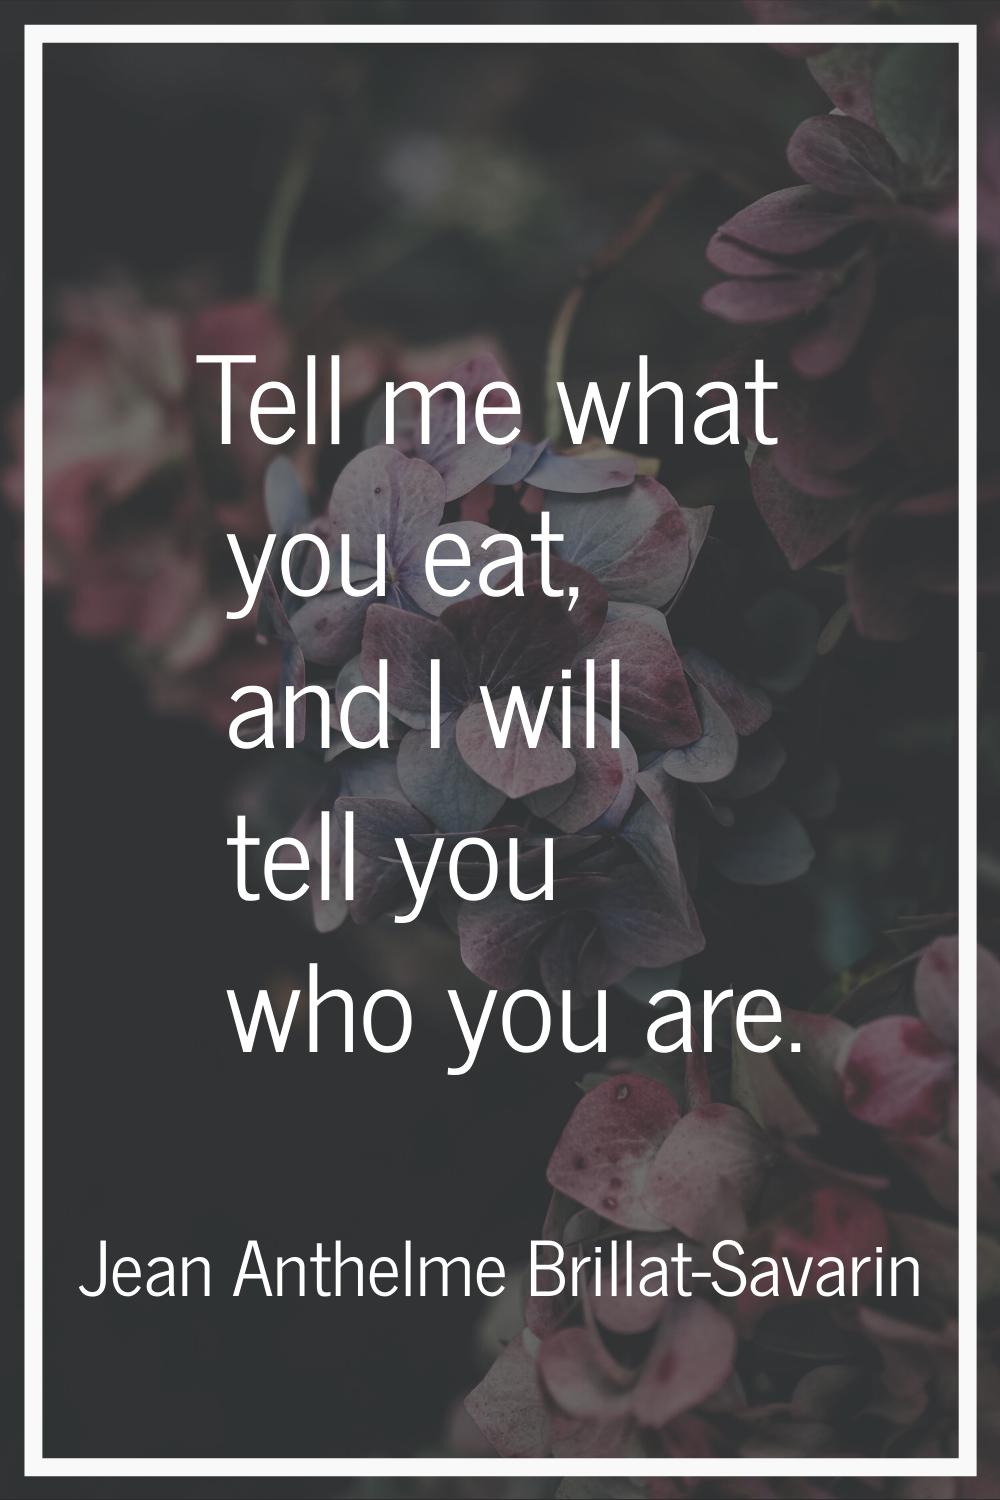 Tell me what you eat, and I will tell you who you are.